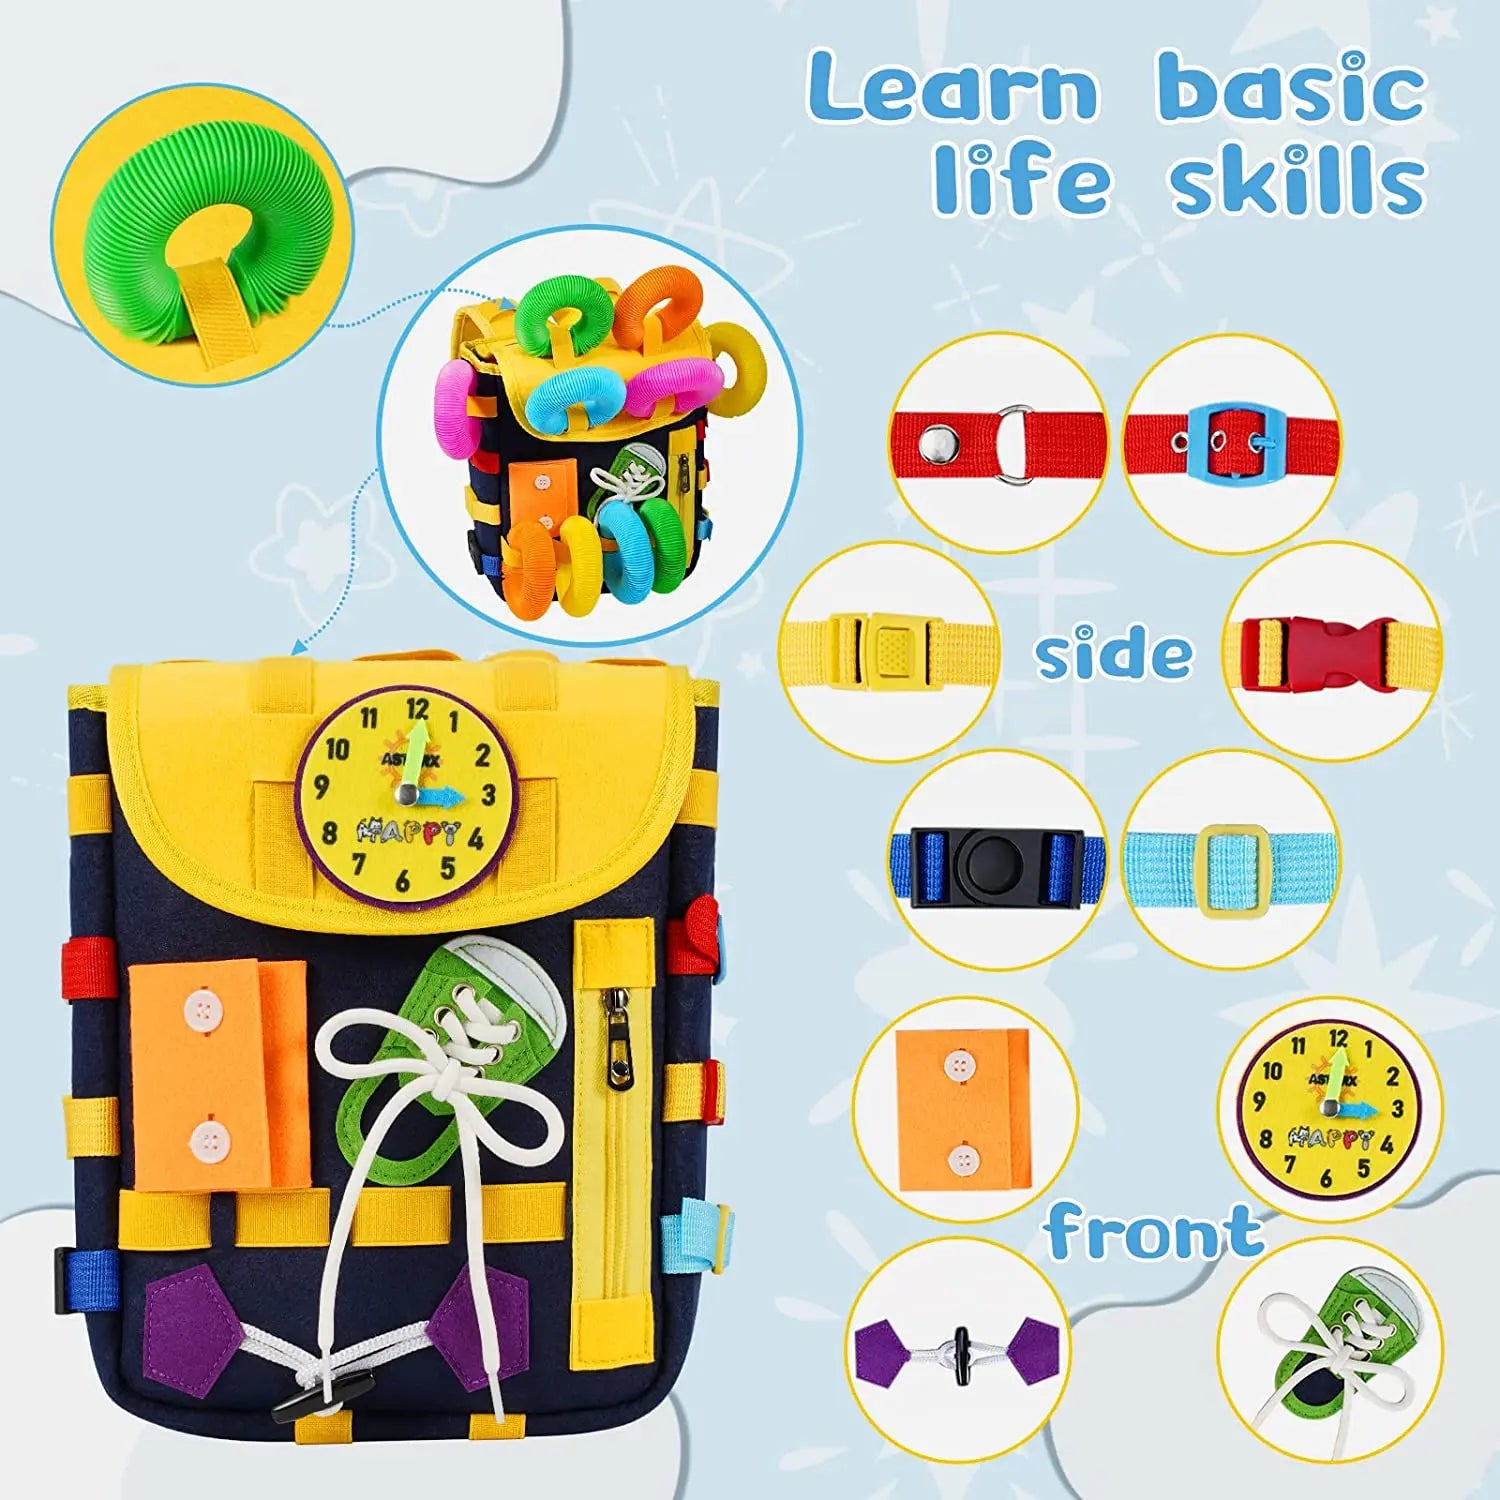 Montessori Busy Board Bag Travel Toys with Buckles for Kids Learning Develop Fine and Basic Motor Skills for Life 